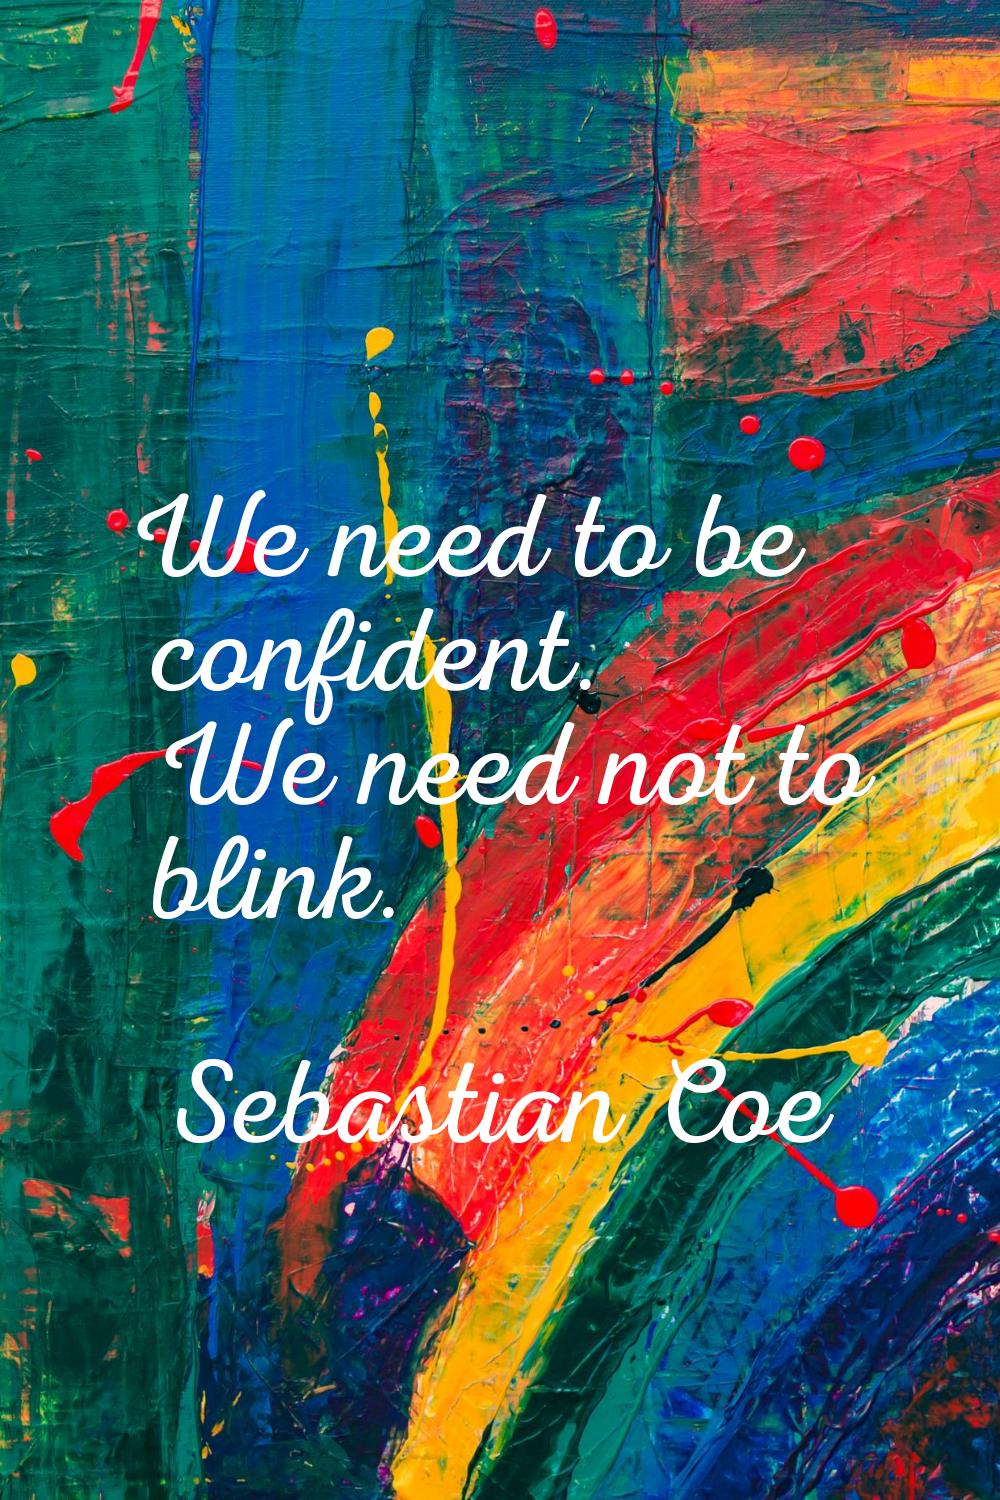 We need to be confident. We need not to blink.